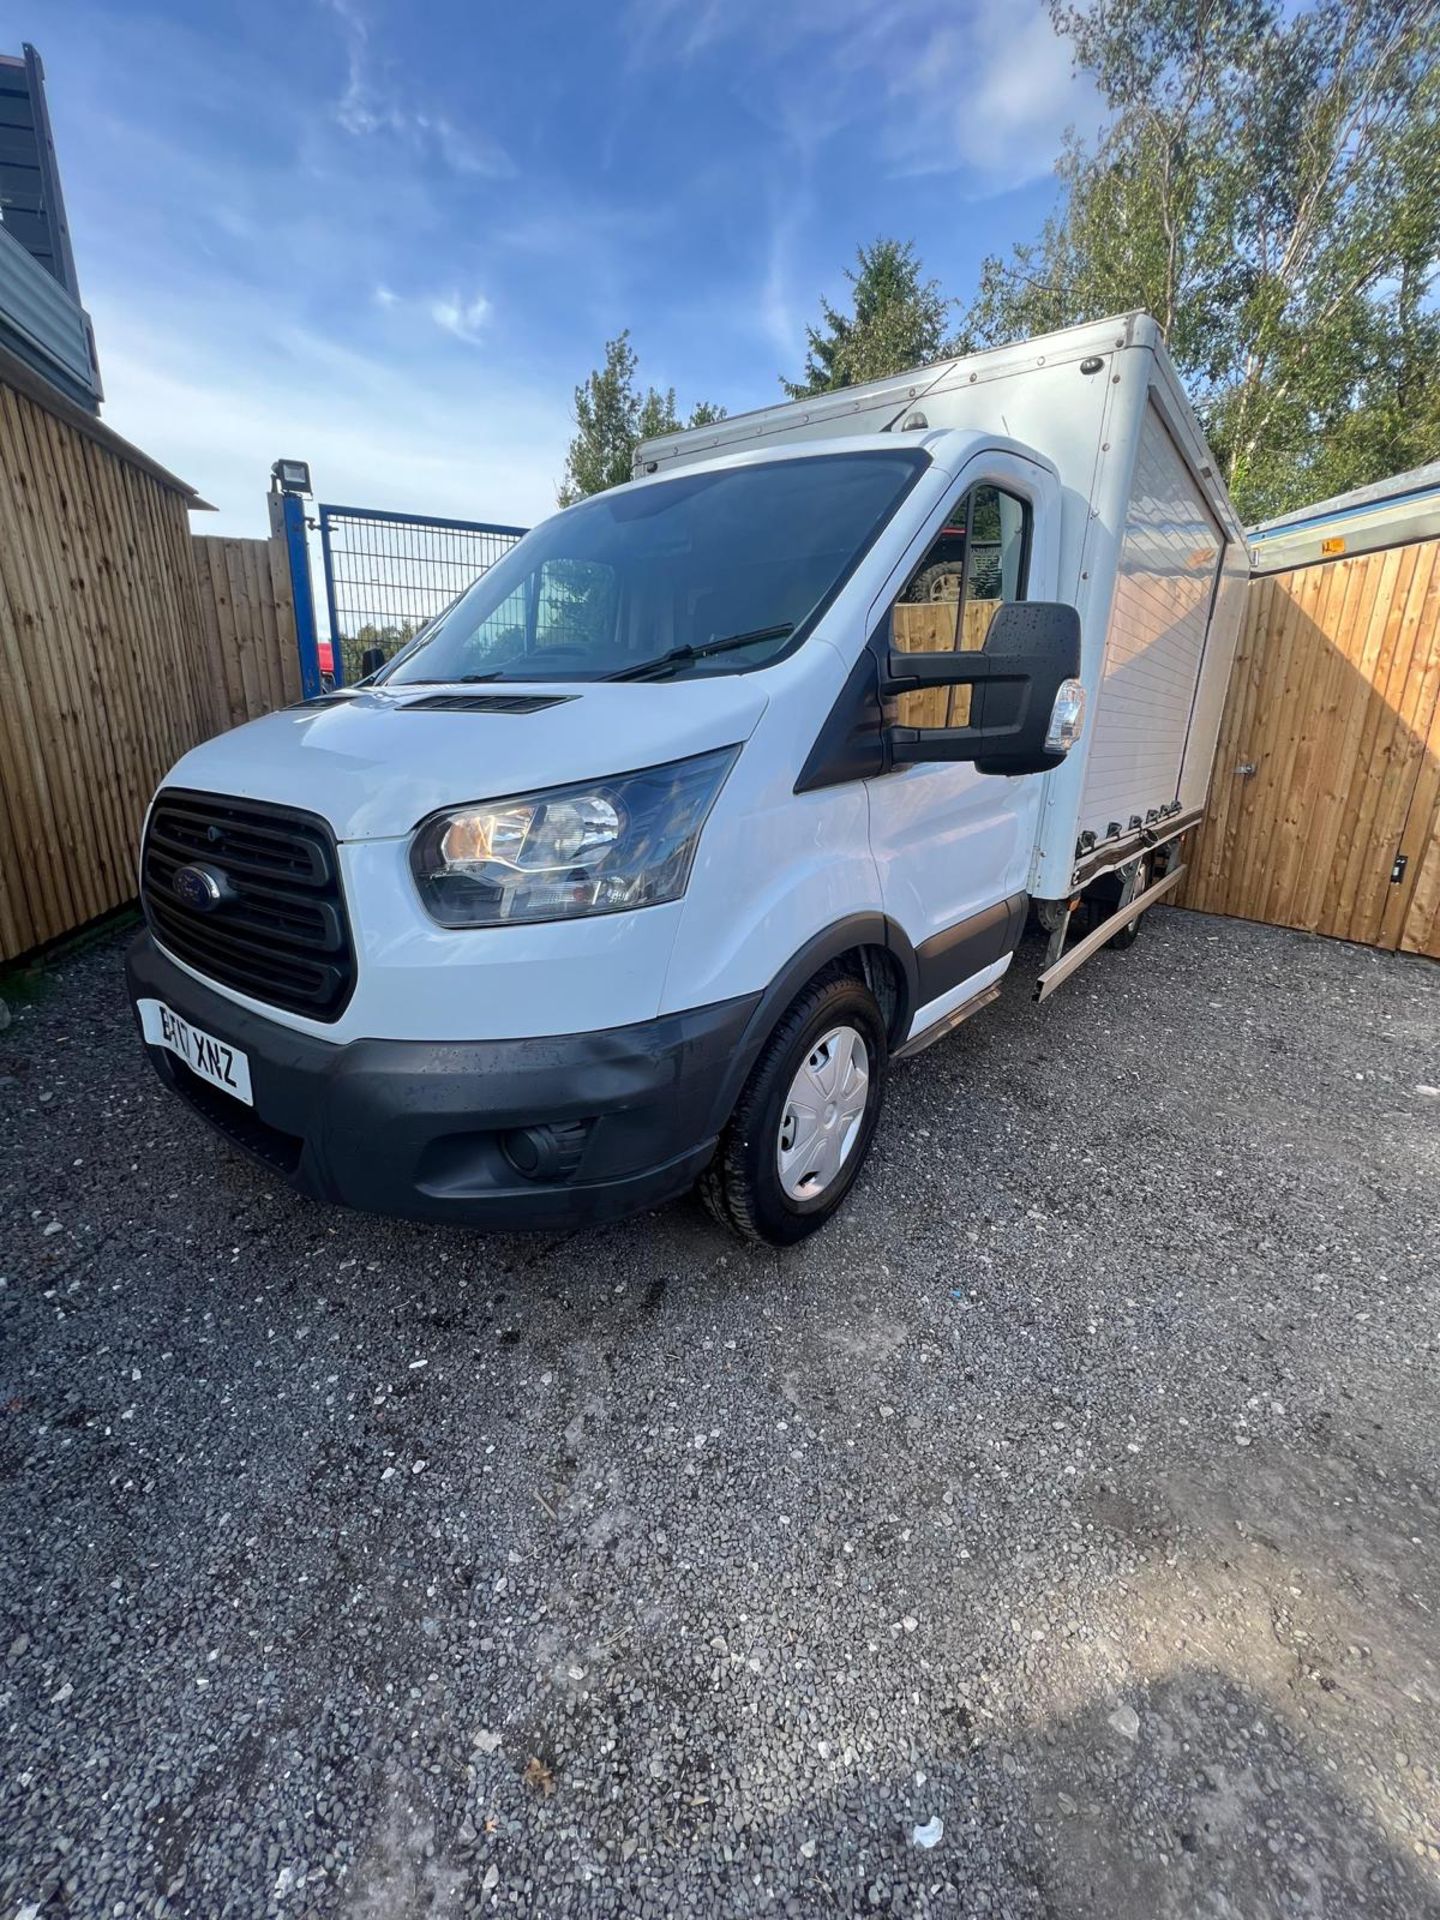 FORD TRANSIT BOX VAN 2017 LUTON EURO6 LWB 6 SPEED MANUAL 1COMPANY OWNER FROM NEW - Image 5 of 14